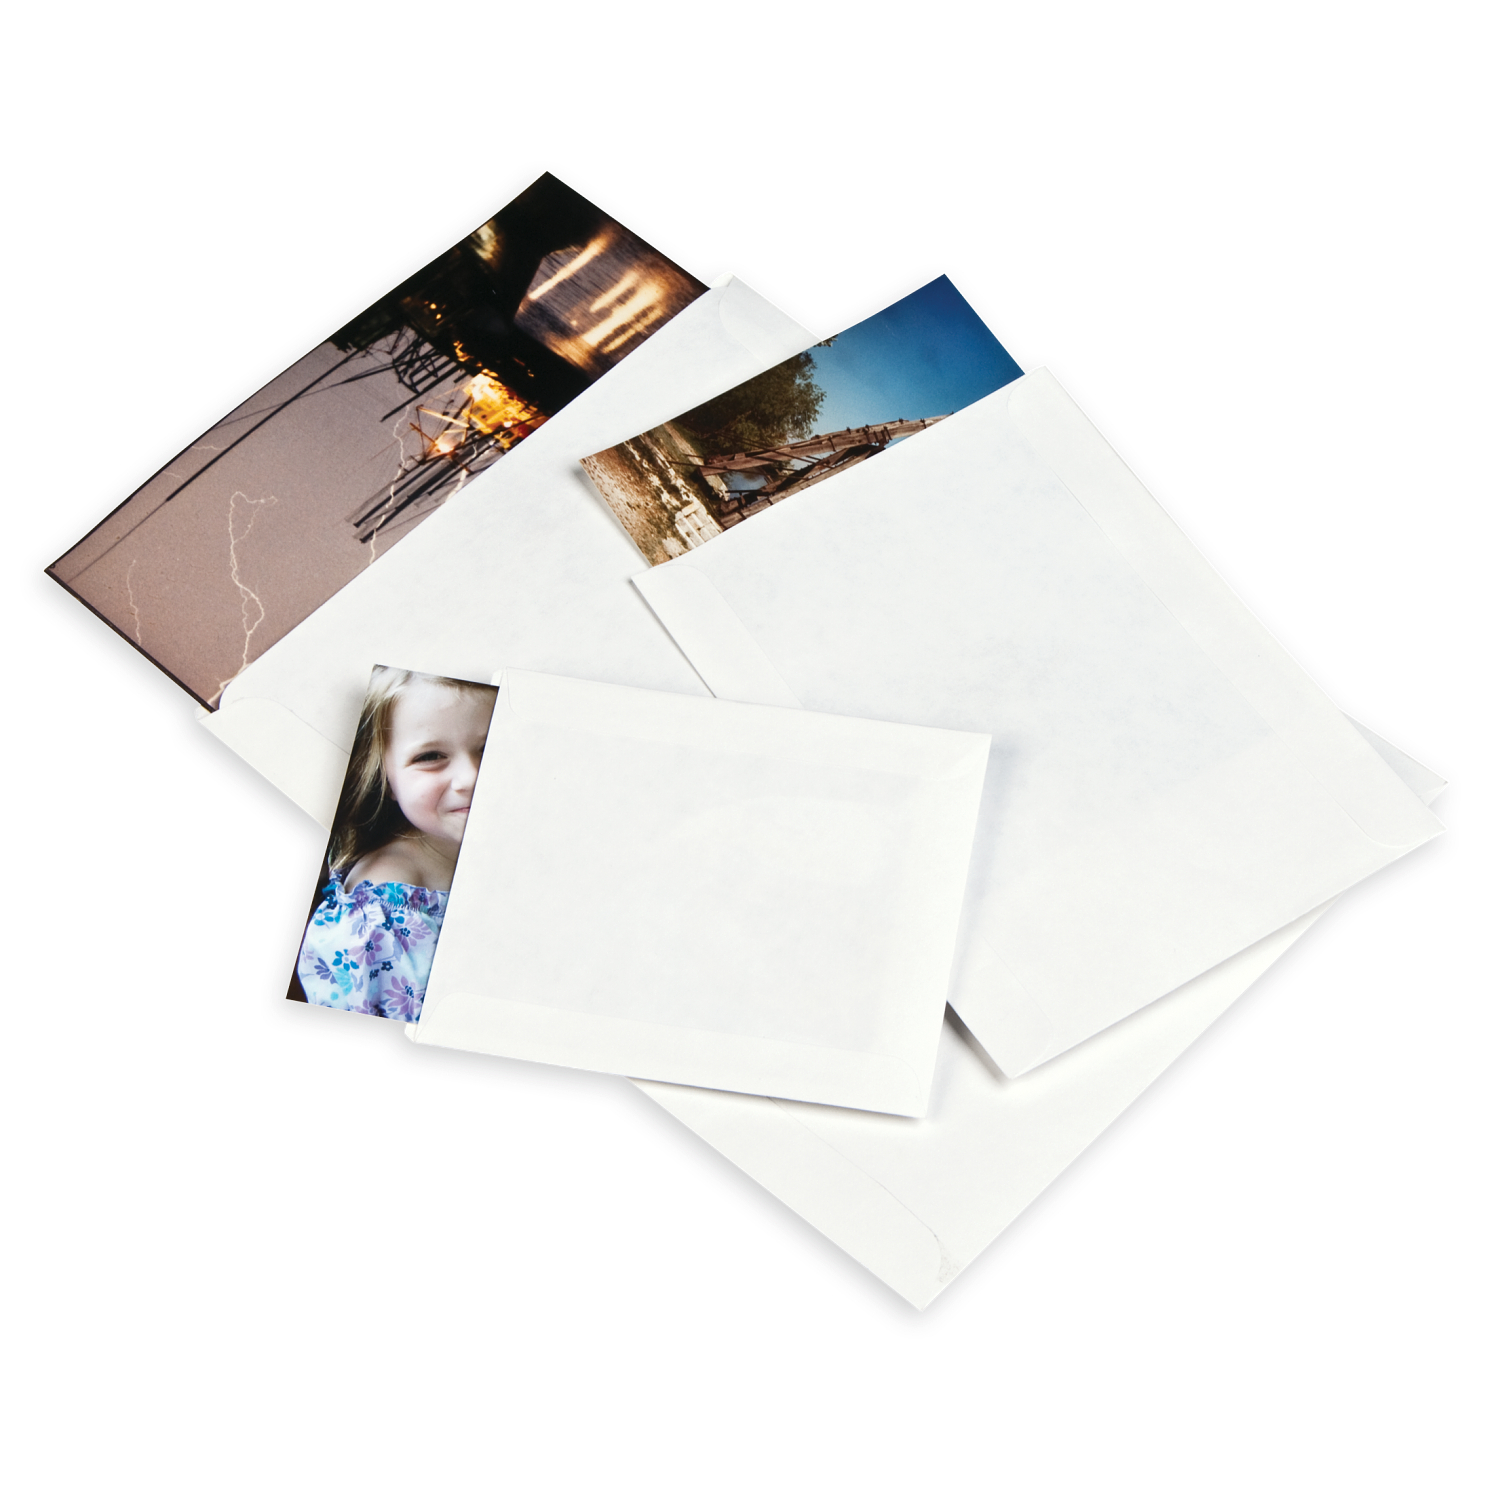 Gaylord Archival® Letter Size Document Storage Kit